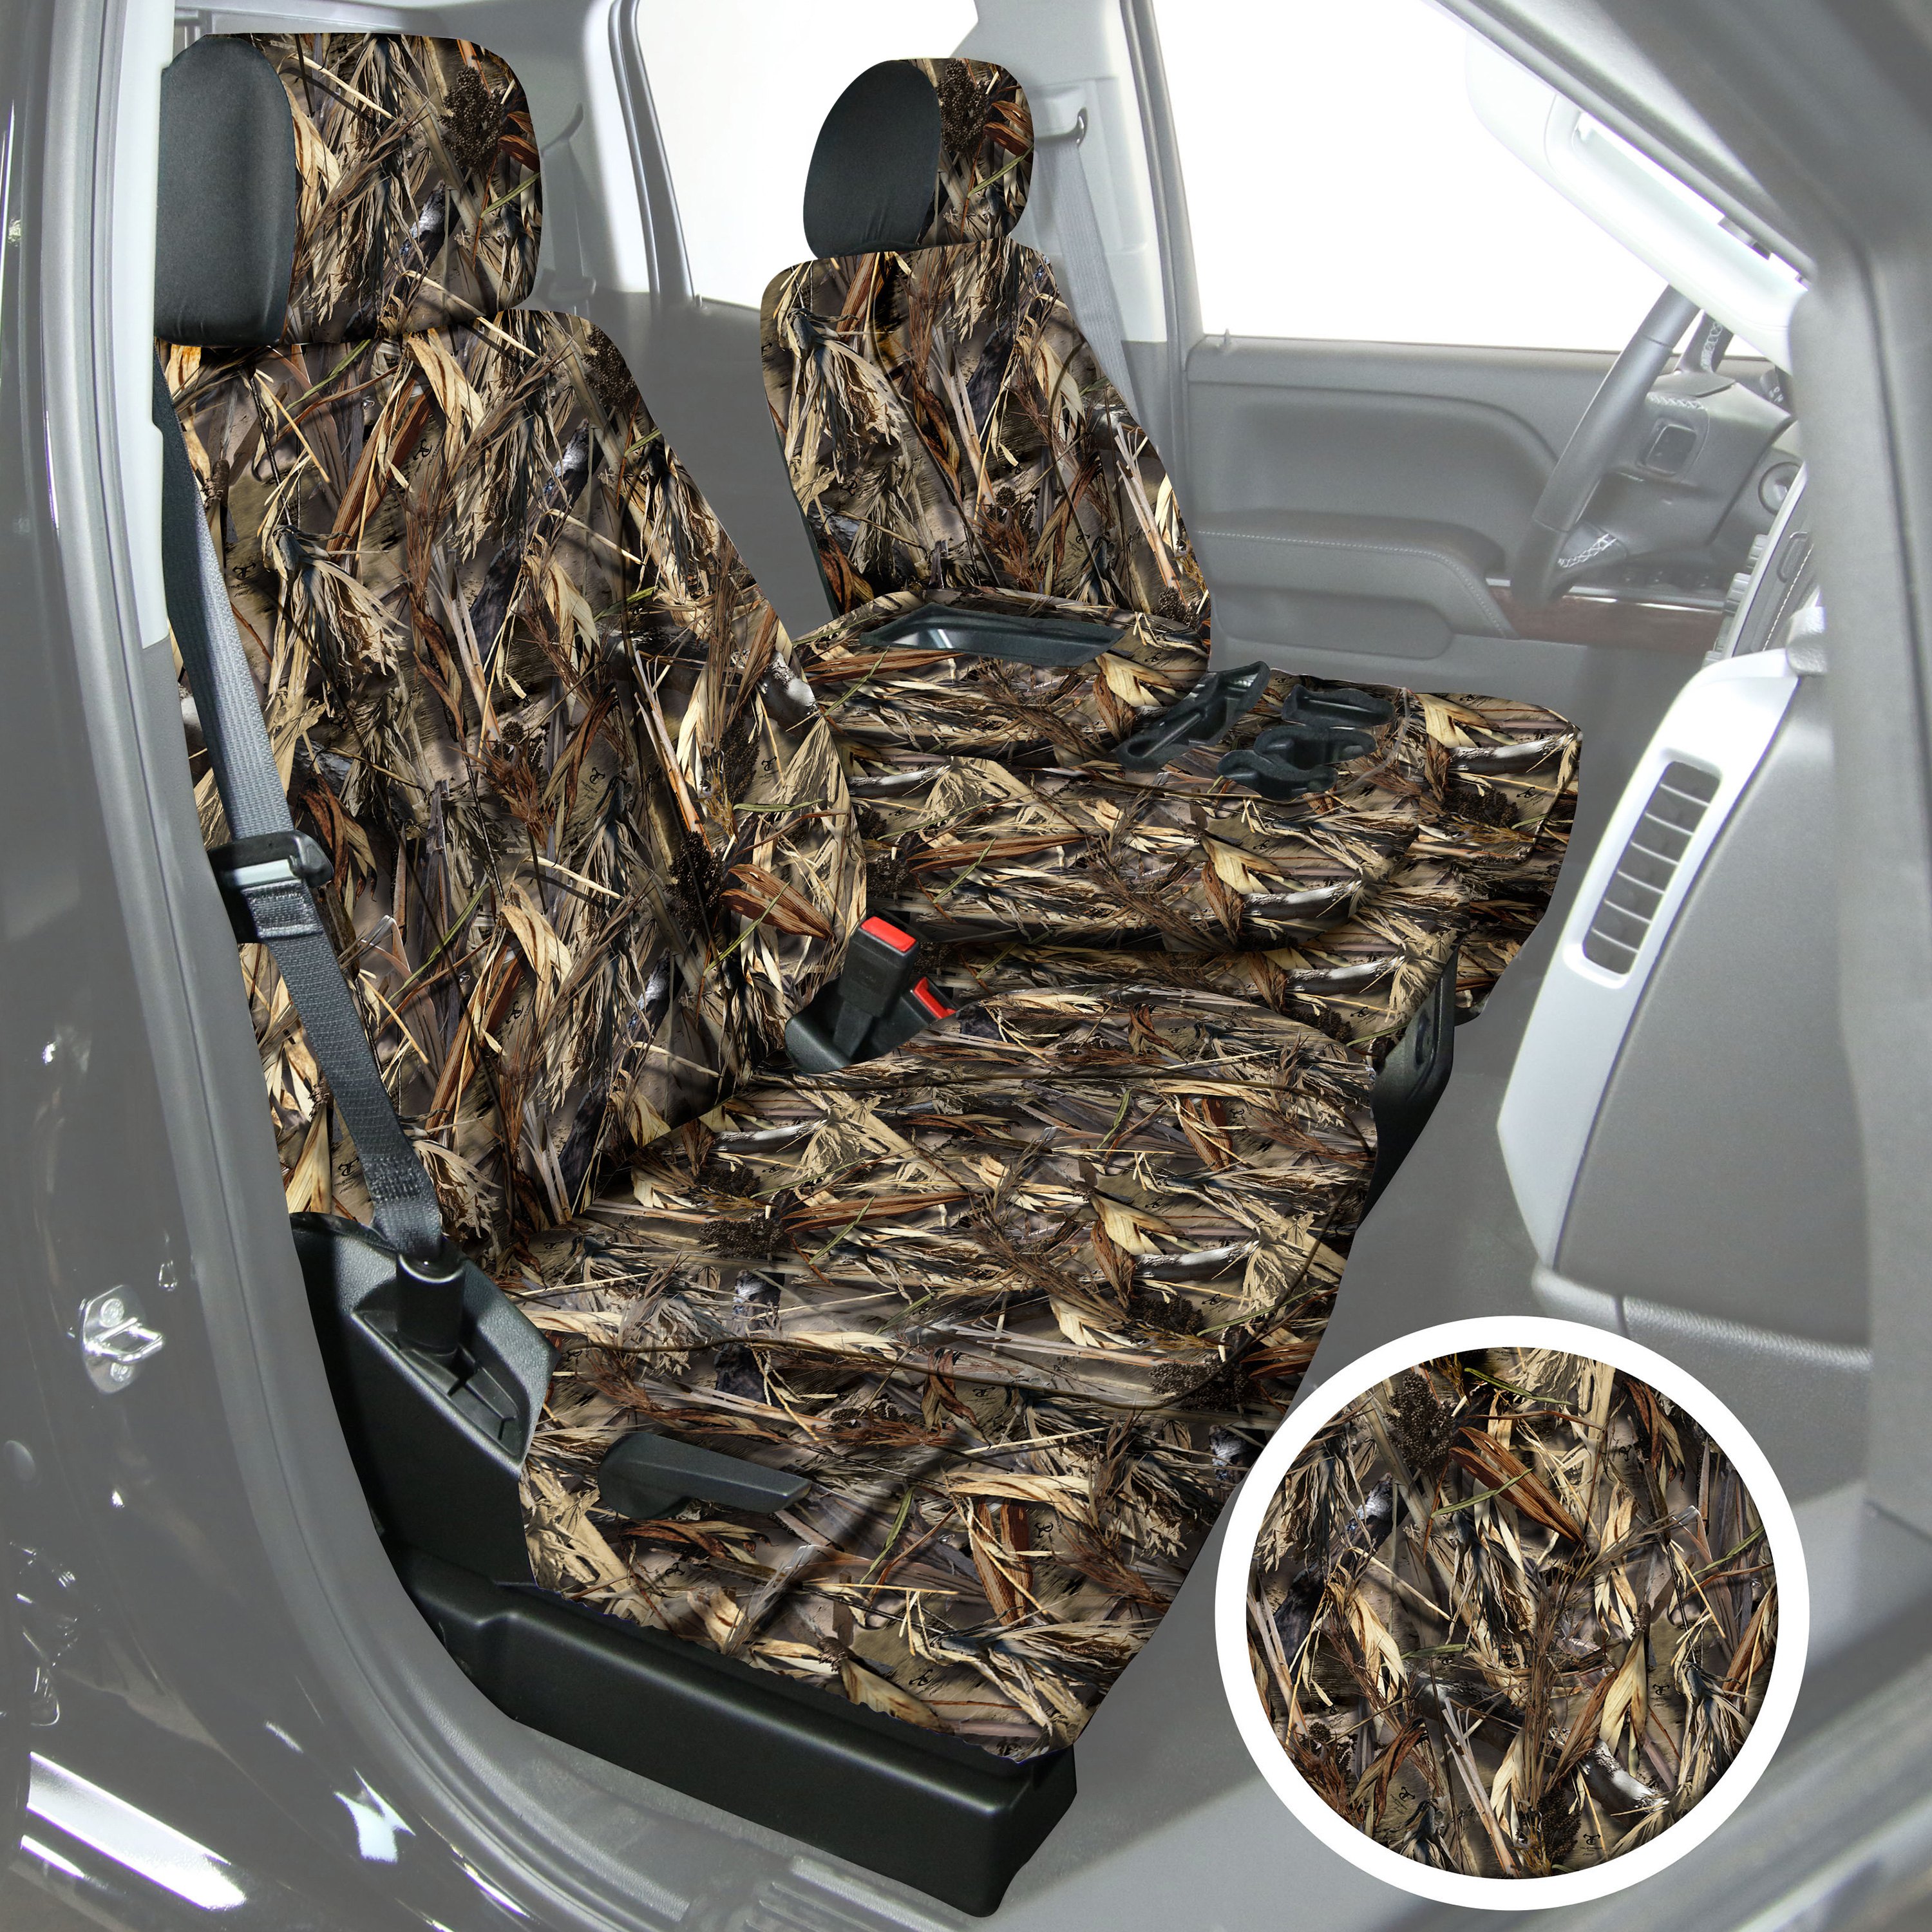 Saddleman Chevy Traverse Fwd 60 40 Split Bench Seat 2018 Truetimber Camo Covers - Seat Covers For 2018 Chevy Traverse Lt